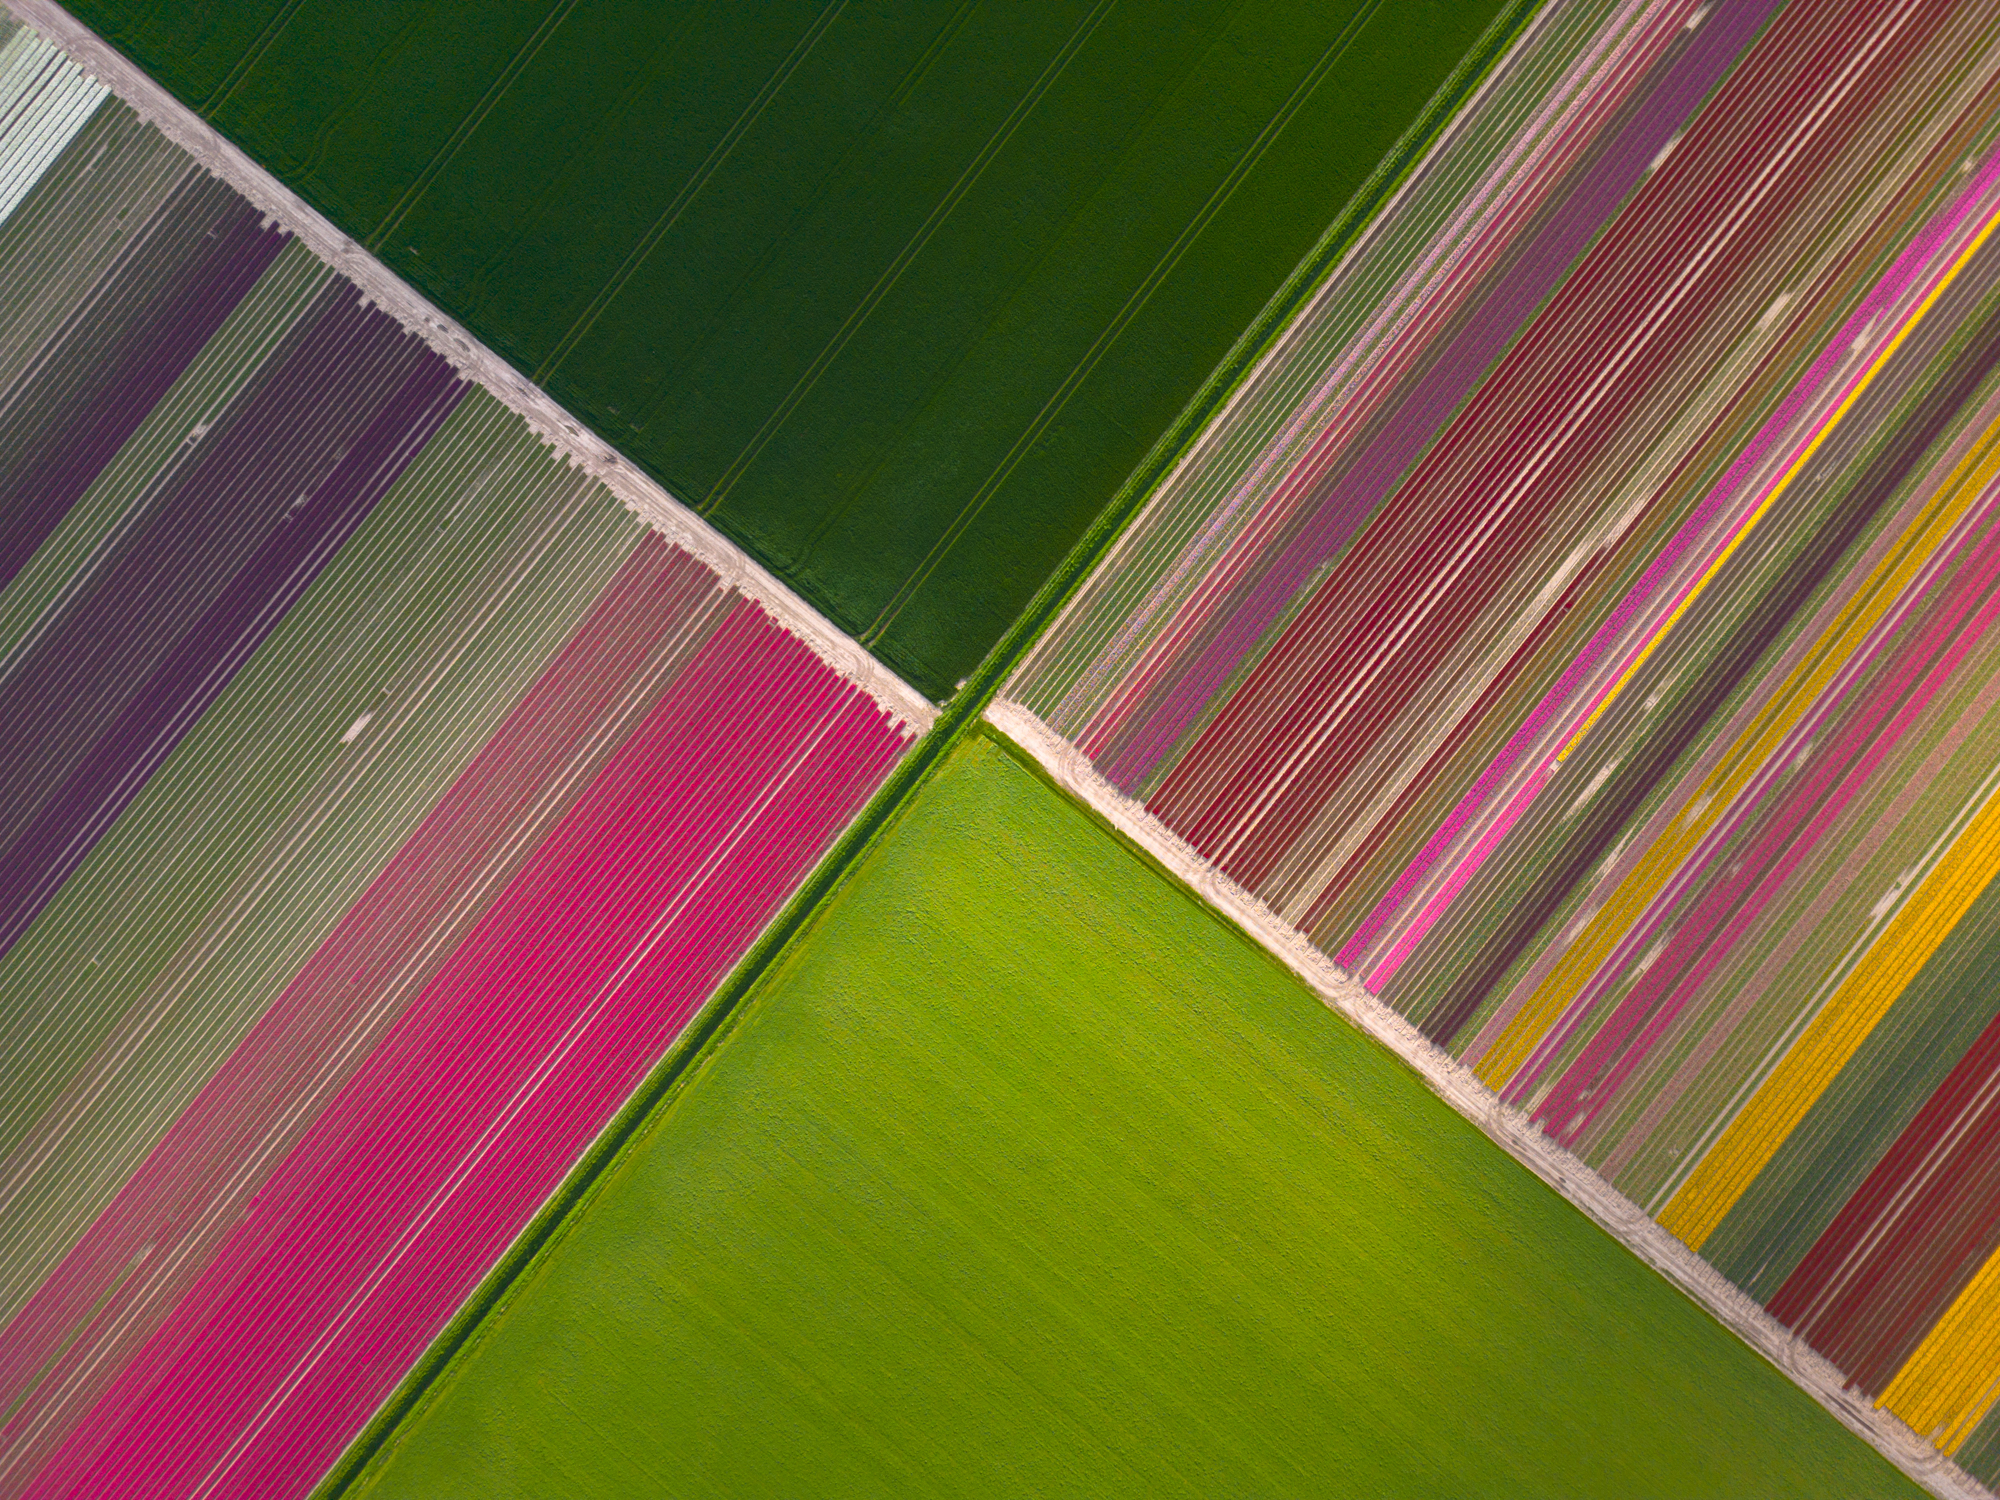 Top-down views of the tulip field: a work of art!